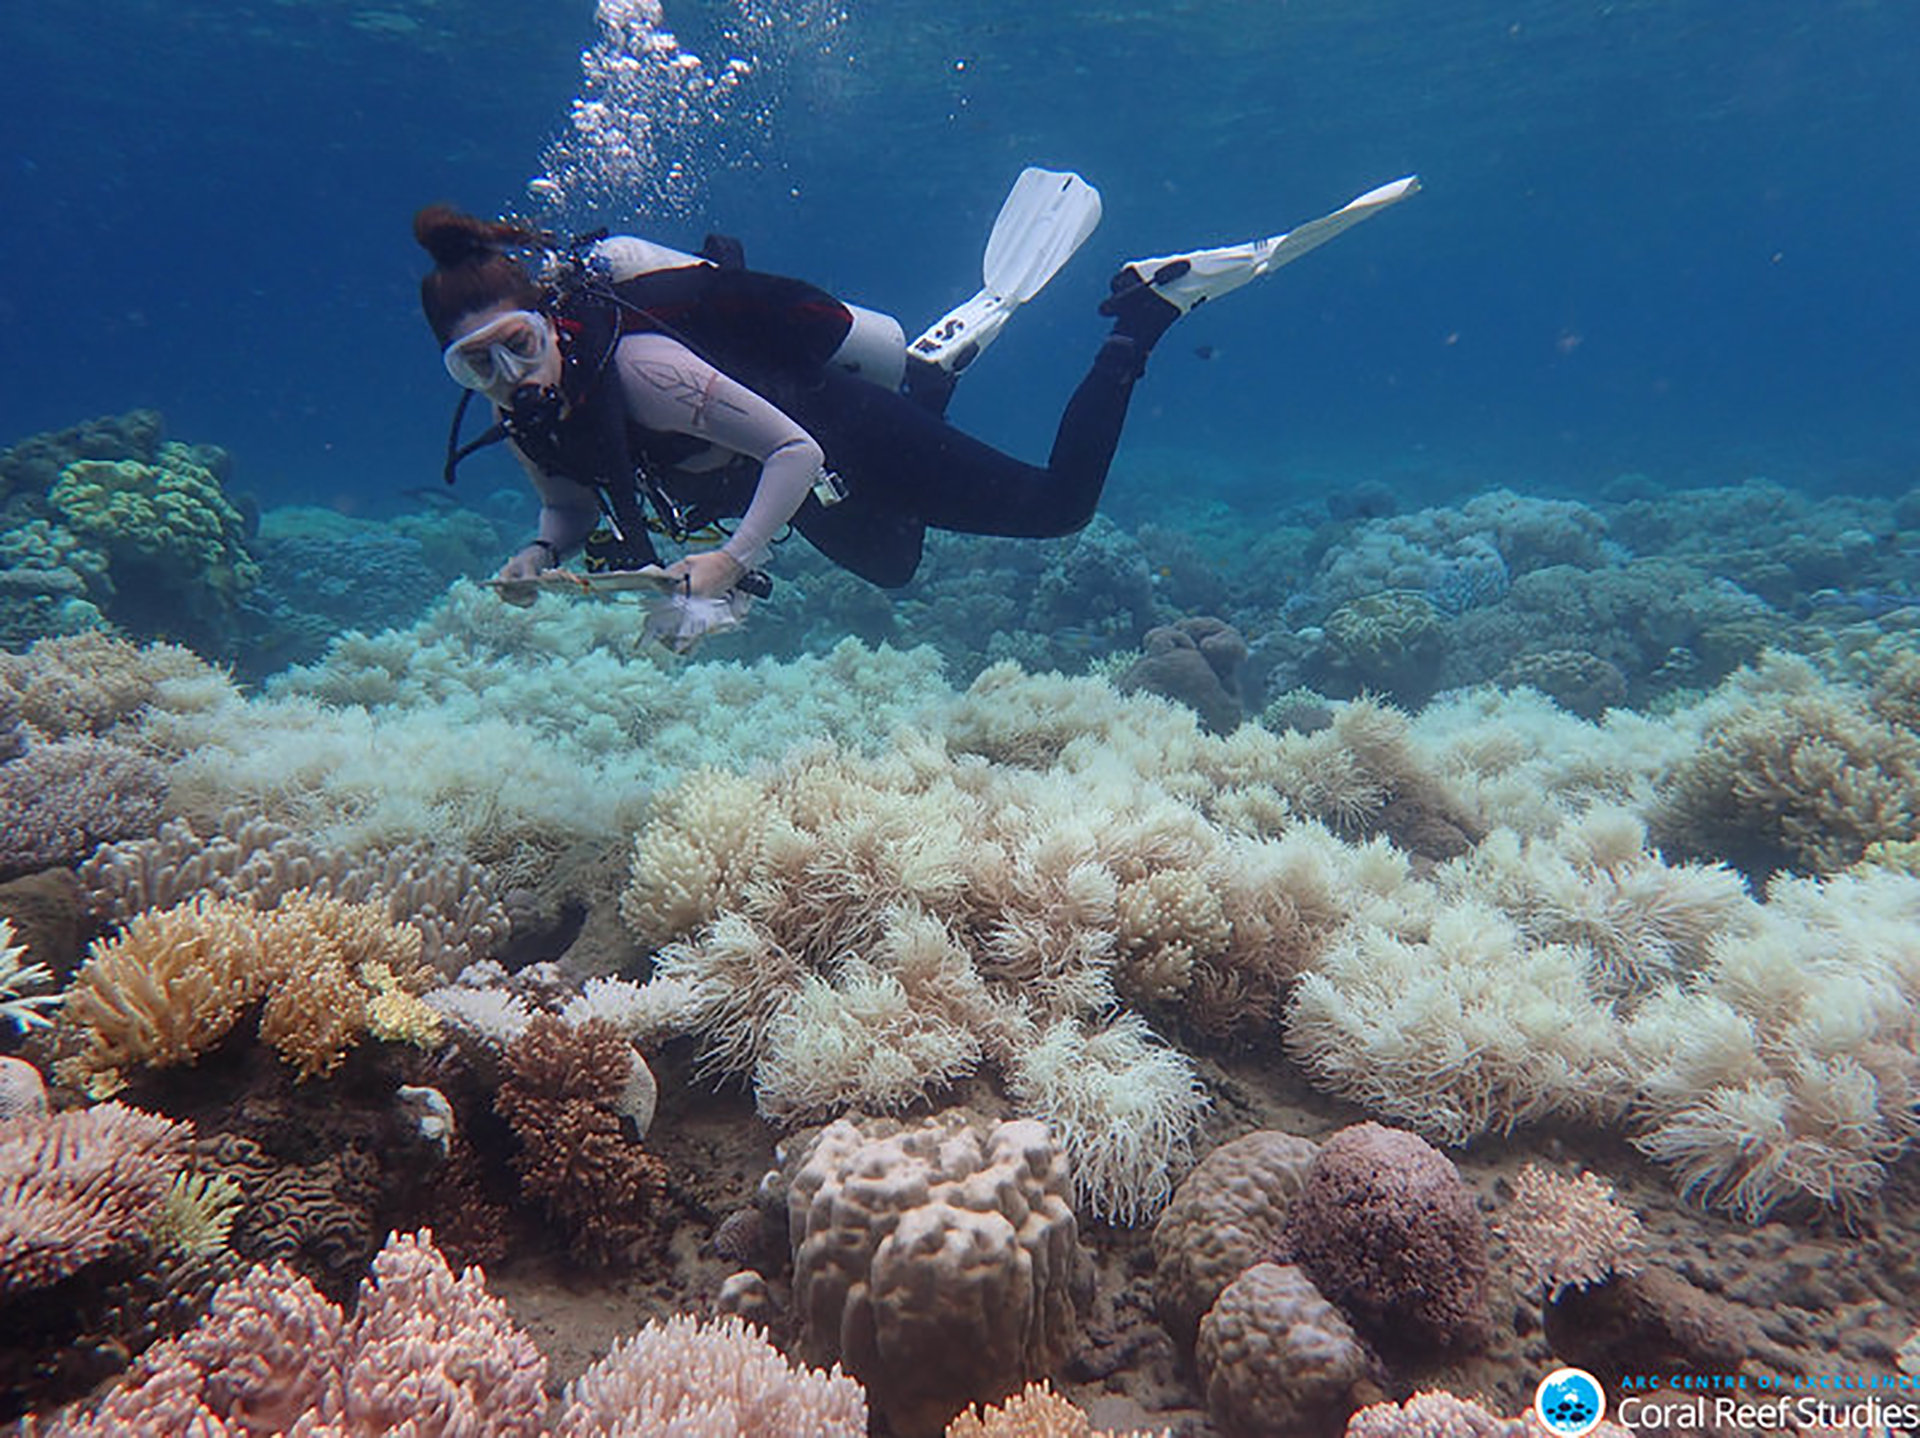 Diver surveying a bleached reef GBR